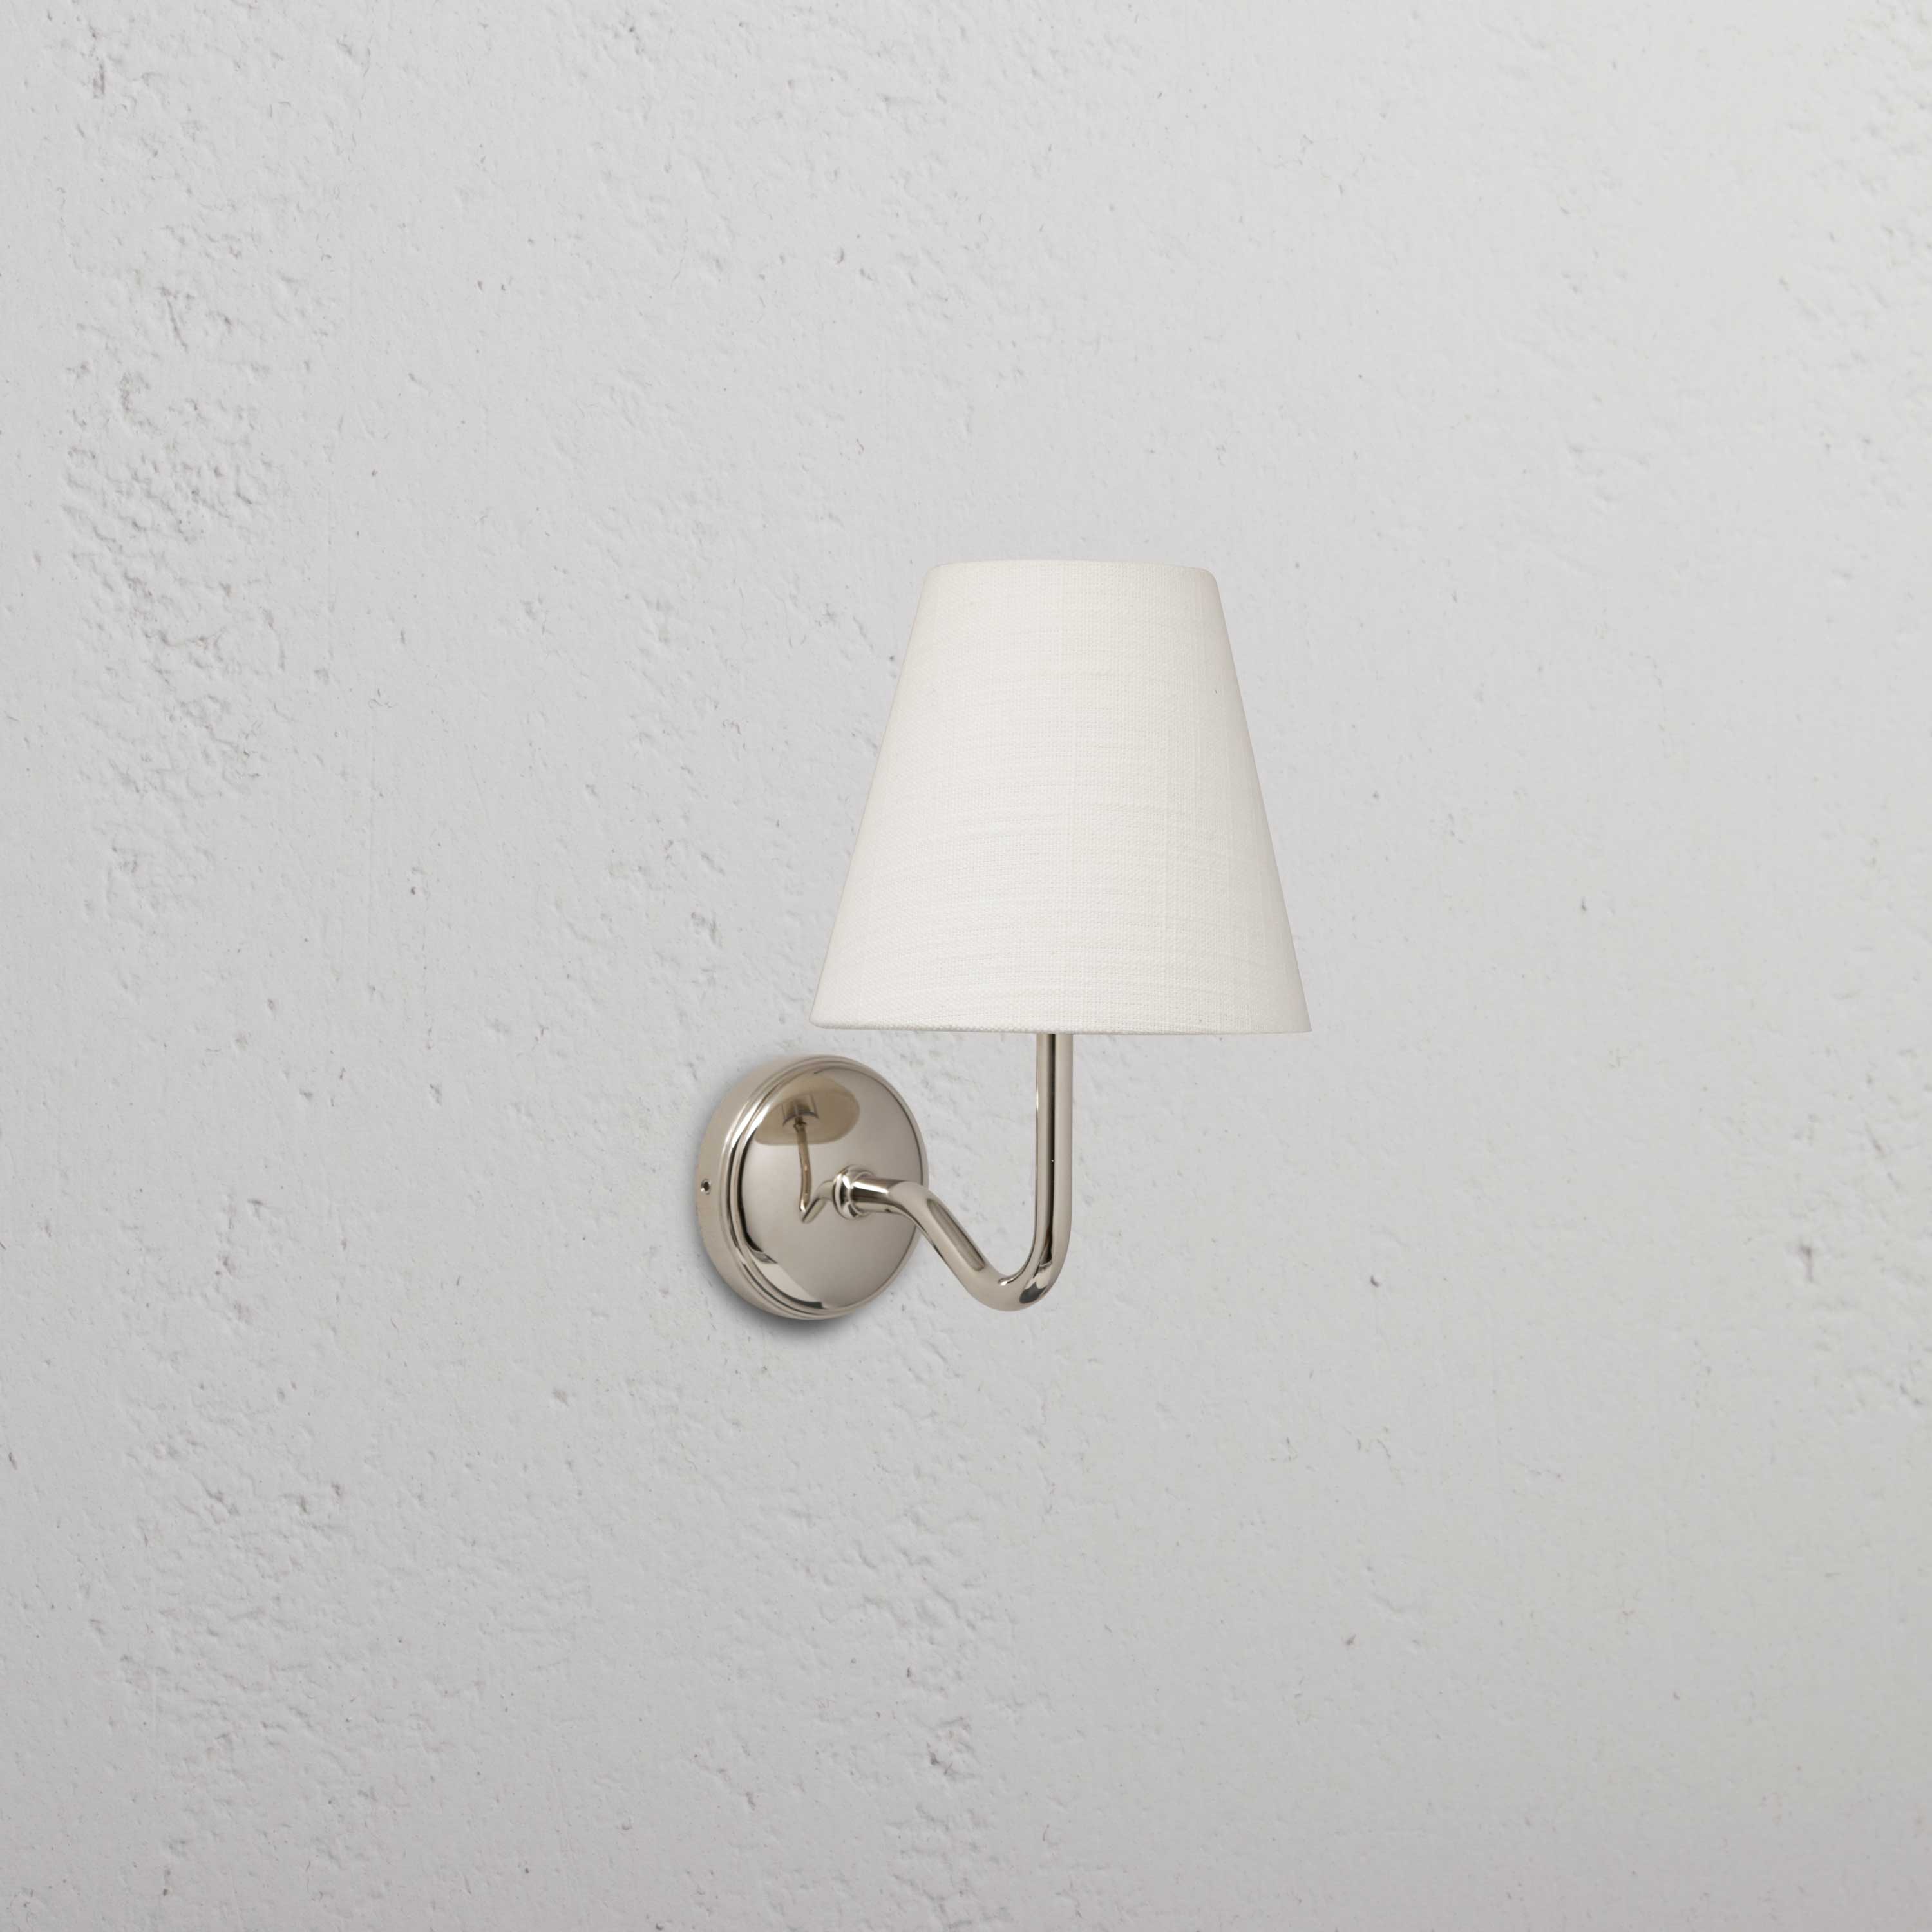 Polished Nickel Wall Light with Alabaster White Linen Shade